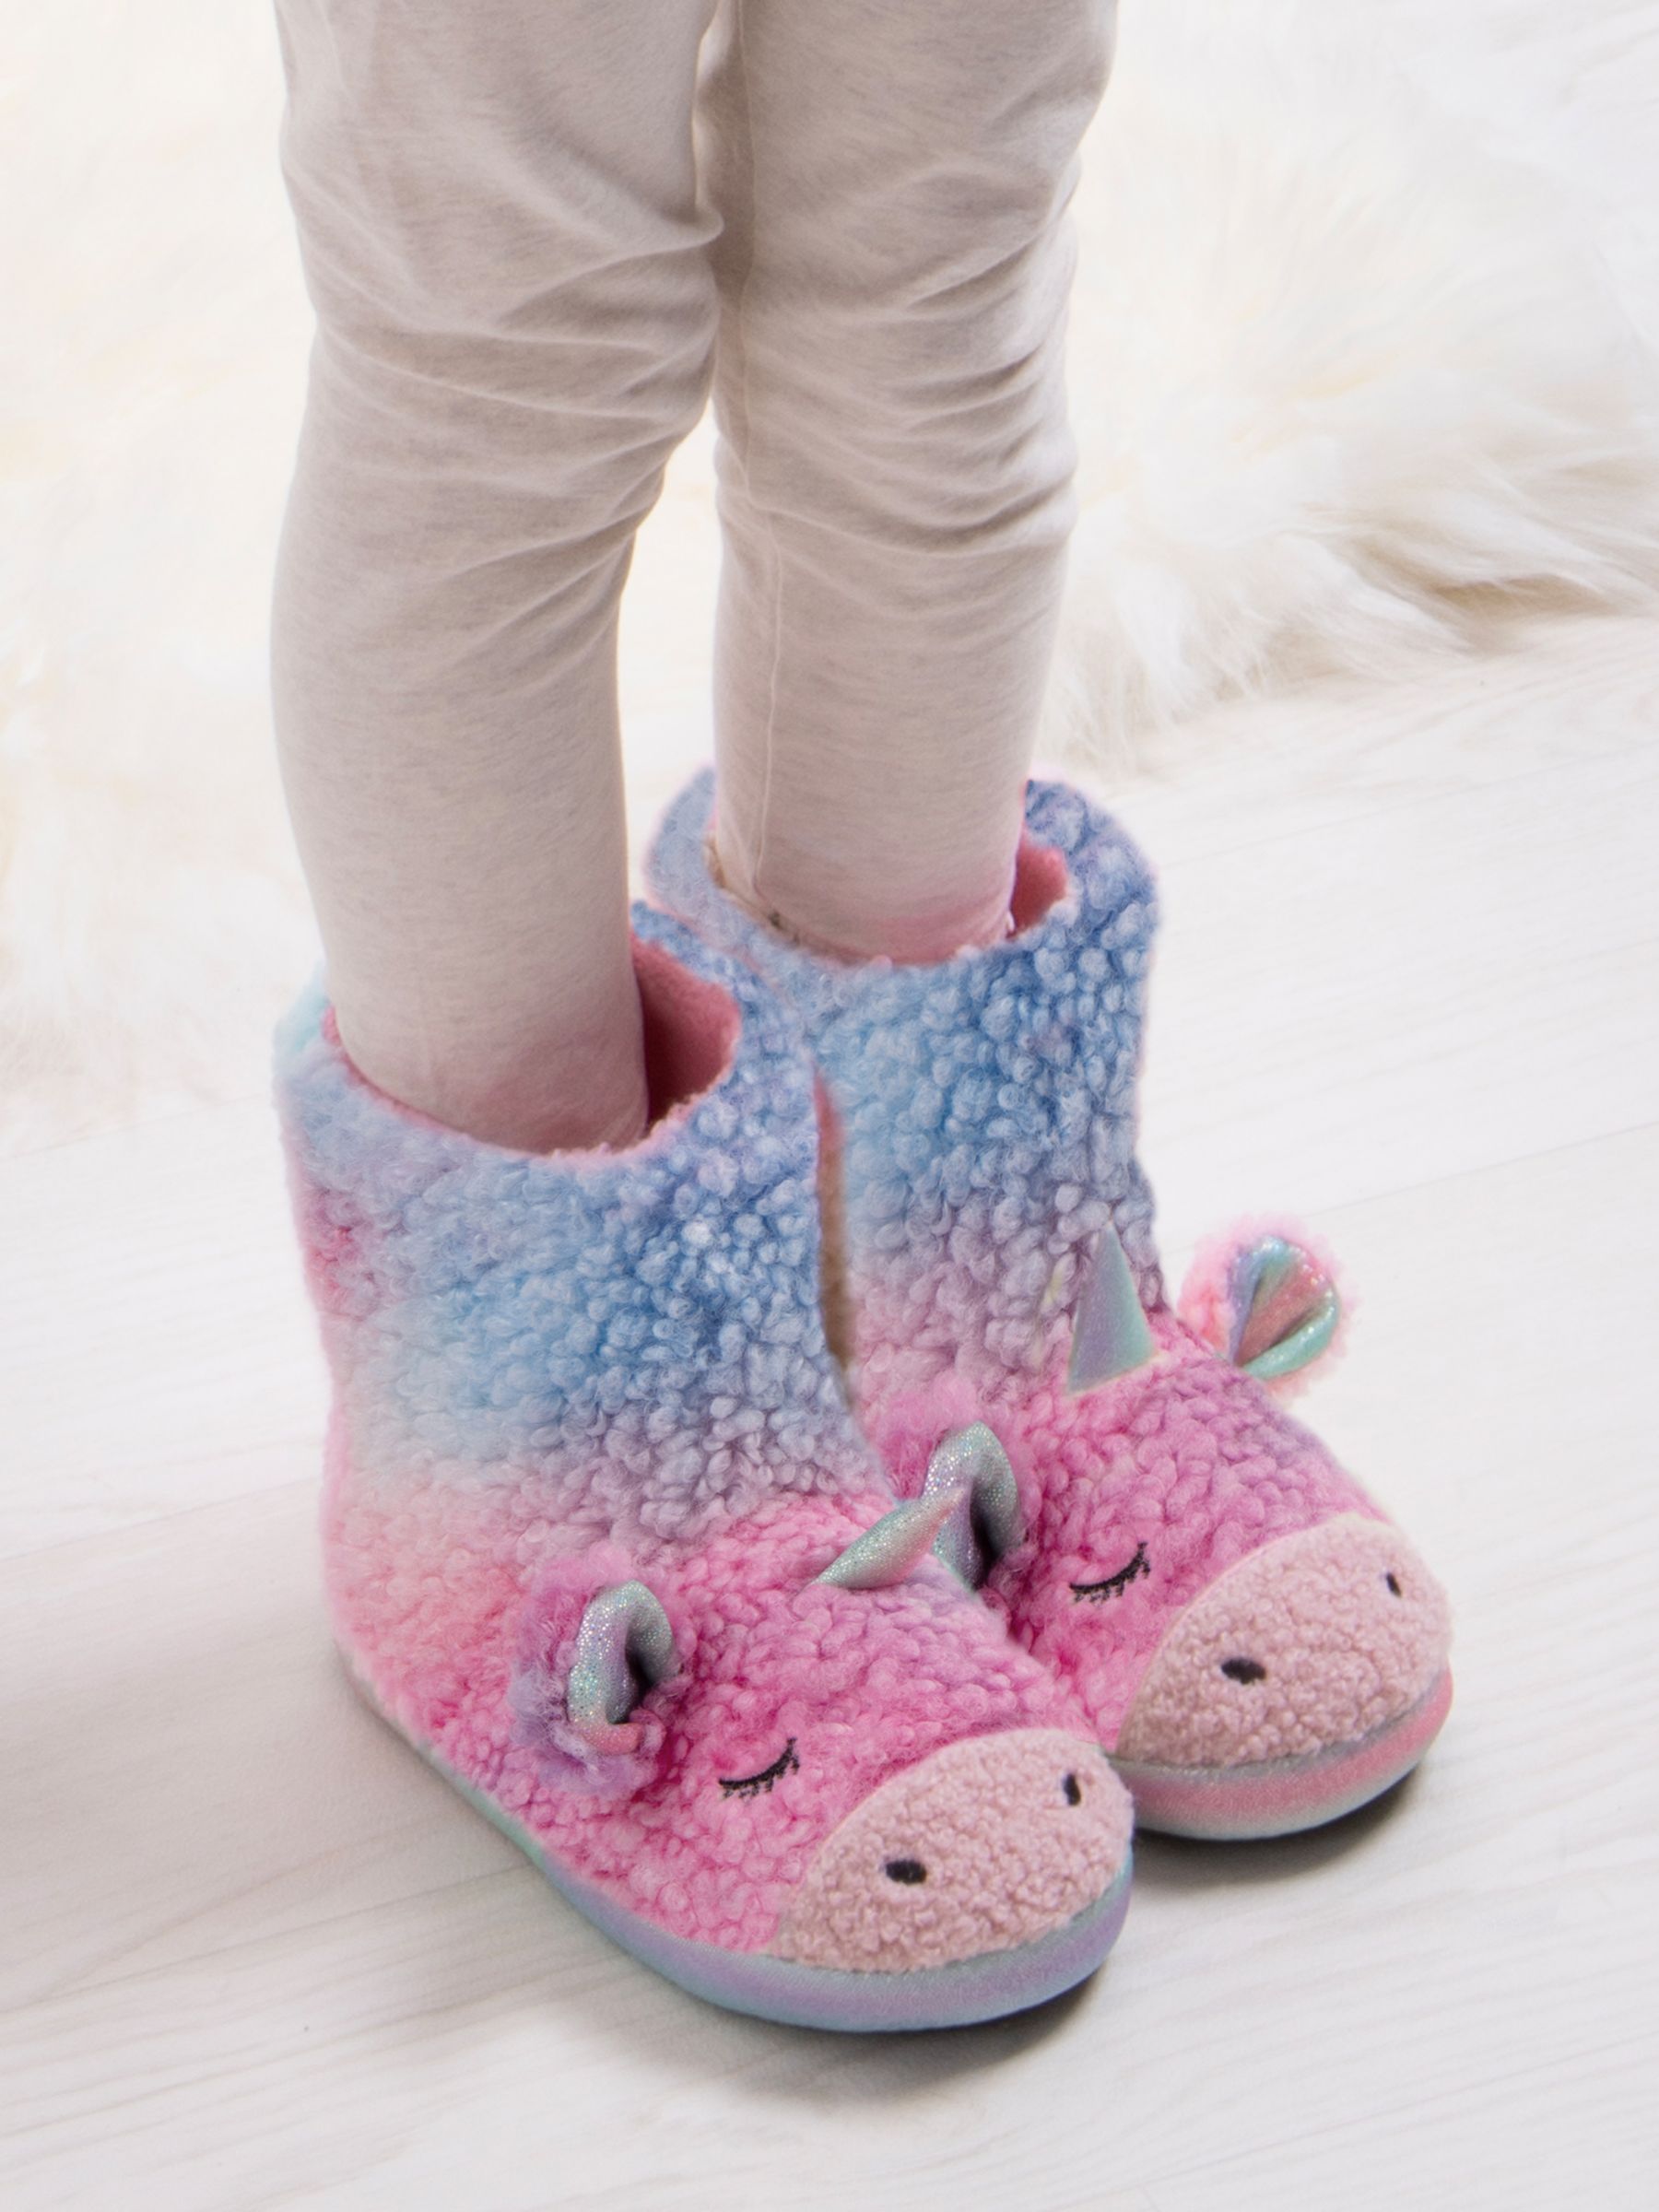 totes Kids' 3D Unicorn Boot Style Slippers, Pink/Blue, 7-8 Jnr